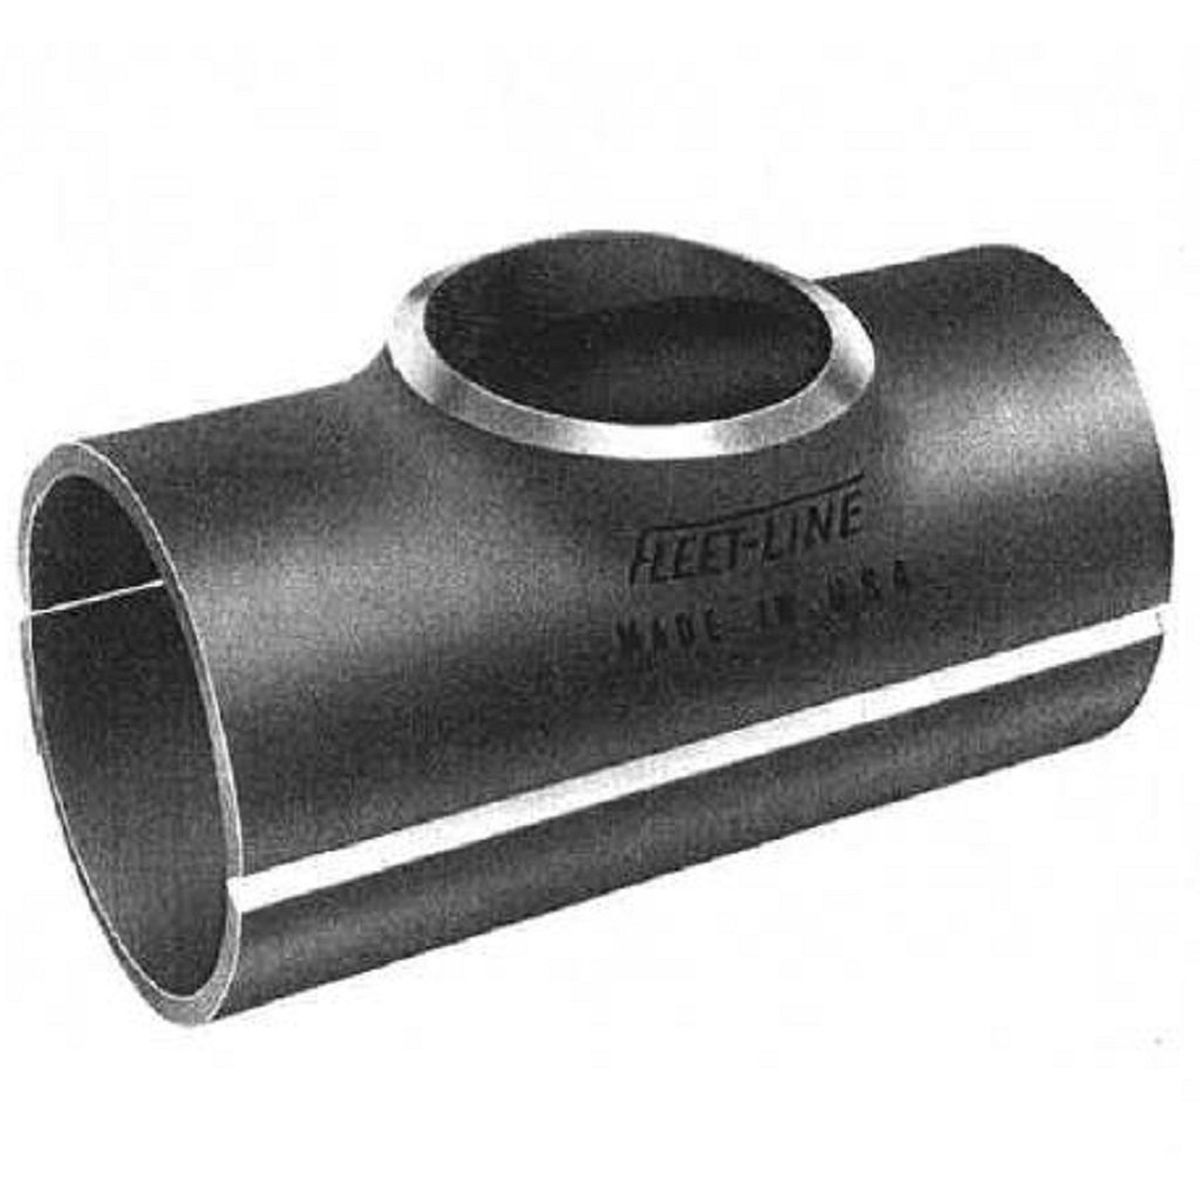 Hot Tap Tee-A234 WpbA3